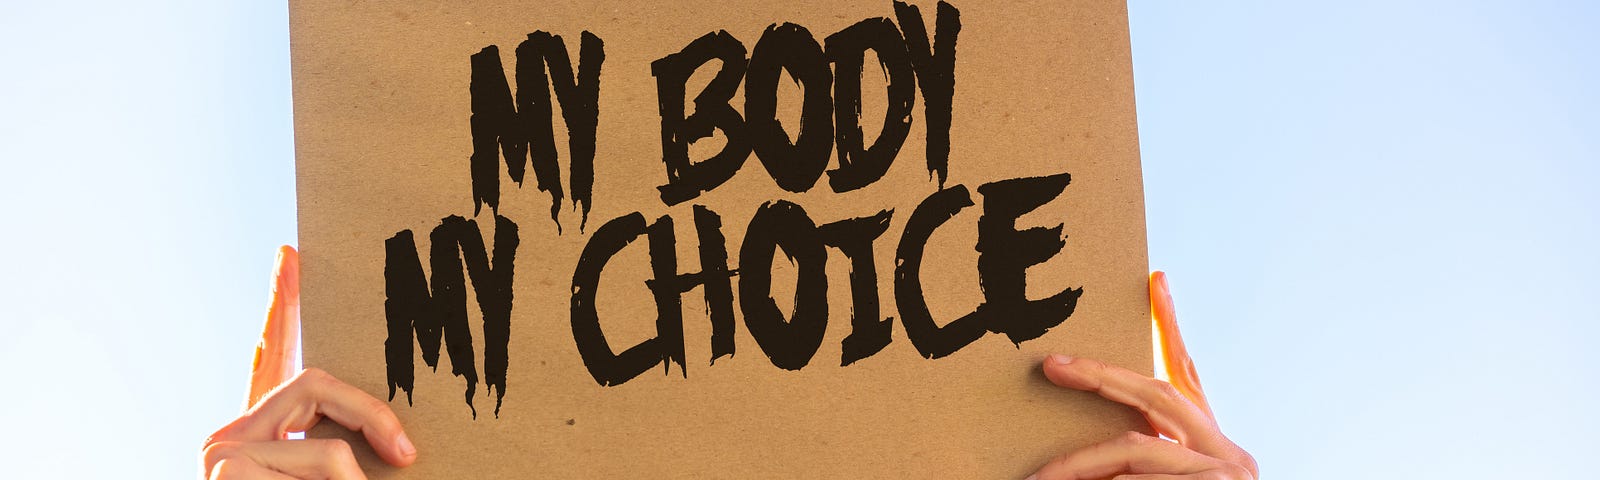 Woman holding a sign that reads “MY BODY MY CHOICE.”